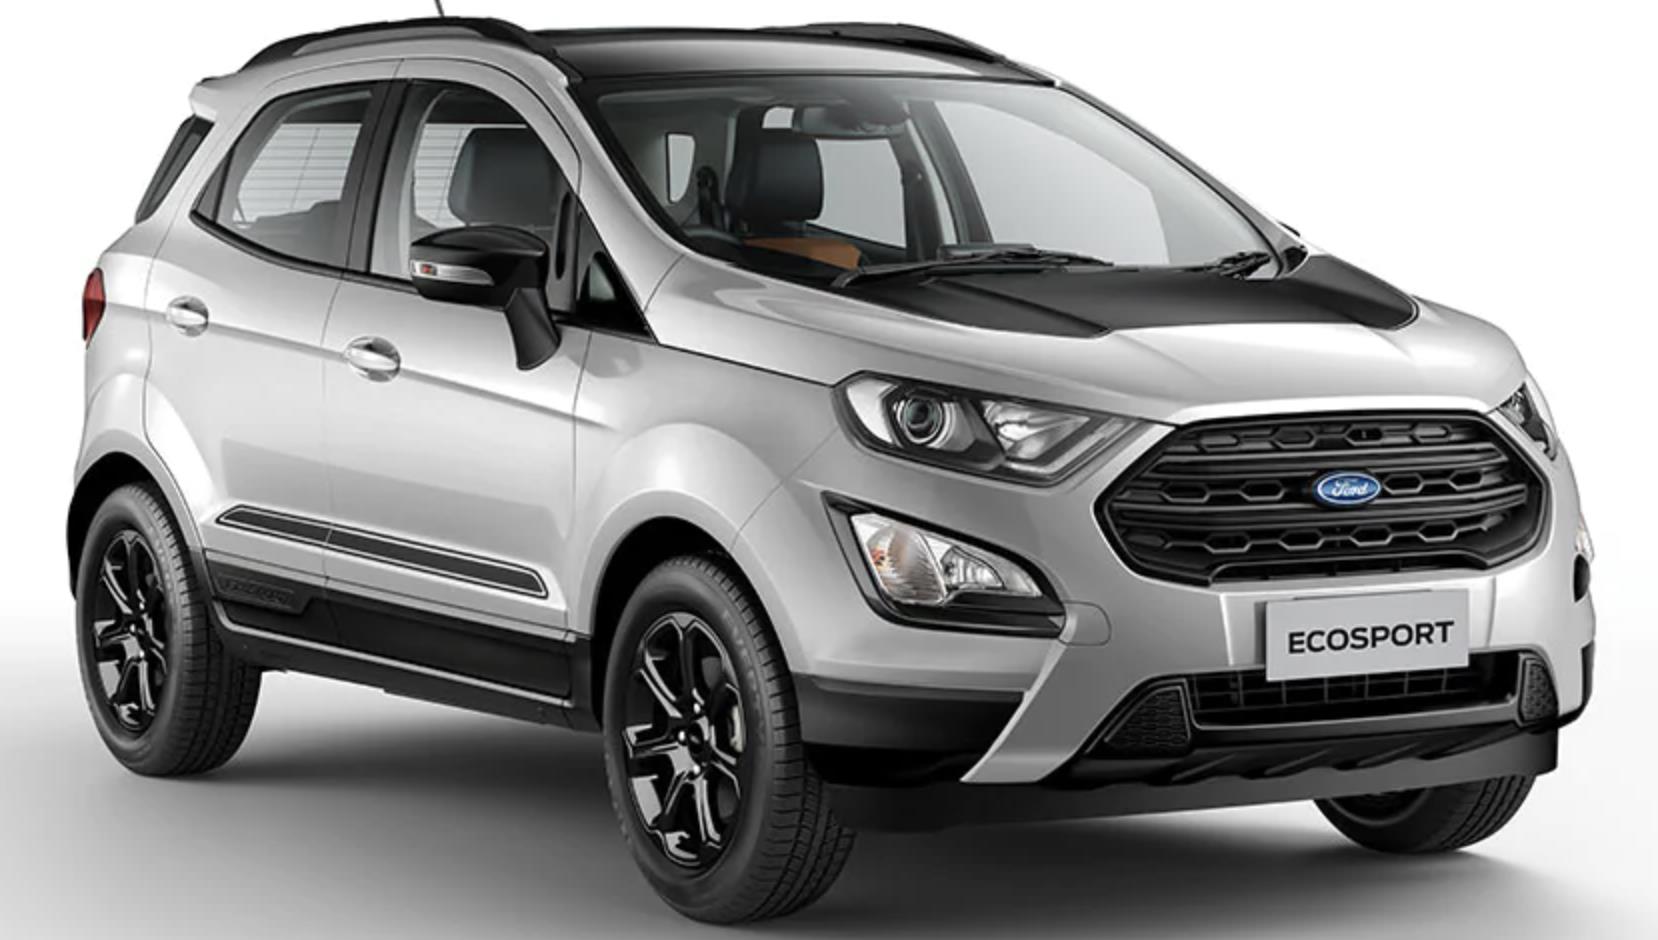 Ford EcoSport Price, Specs, Review, Pics & Mileage in India